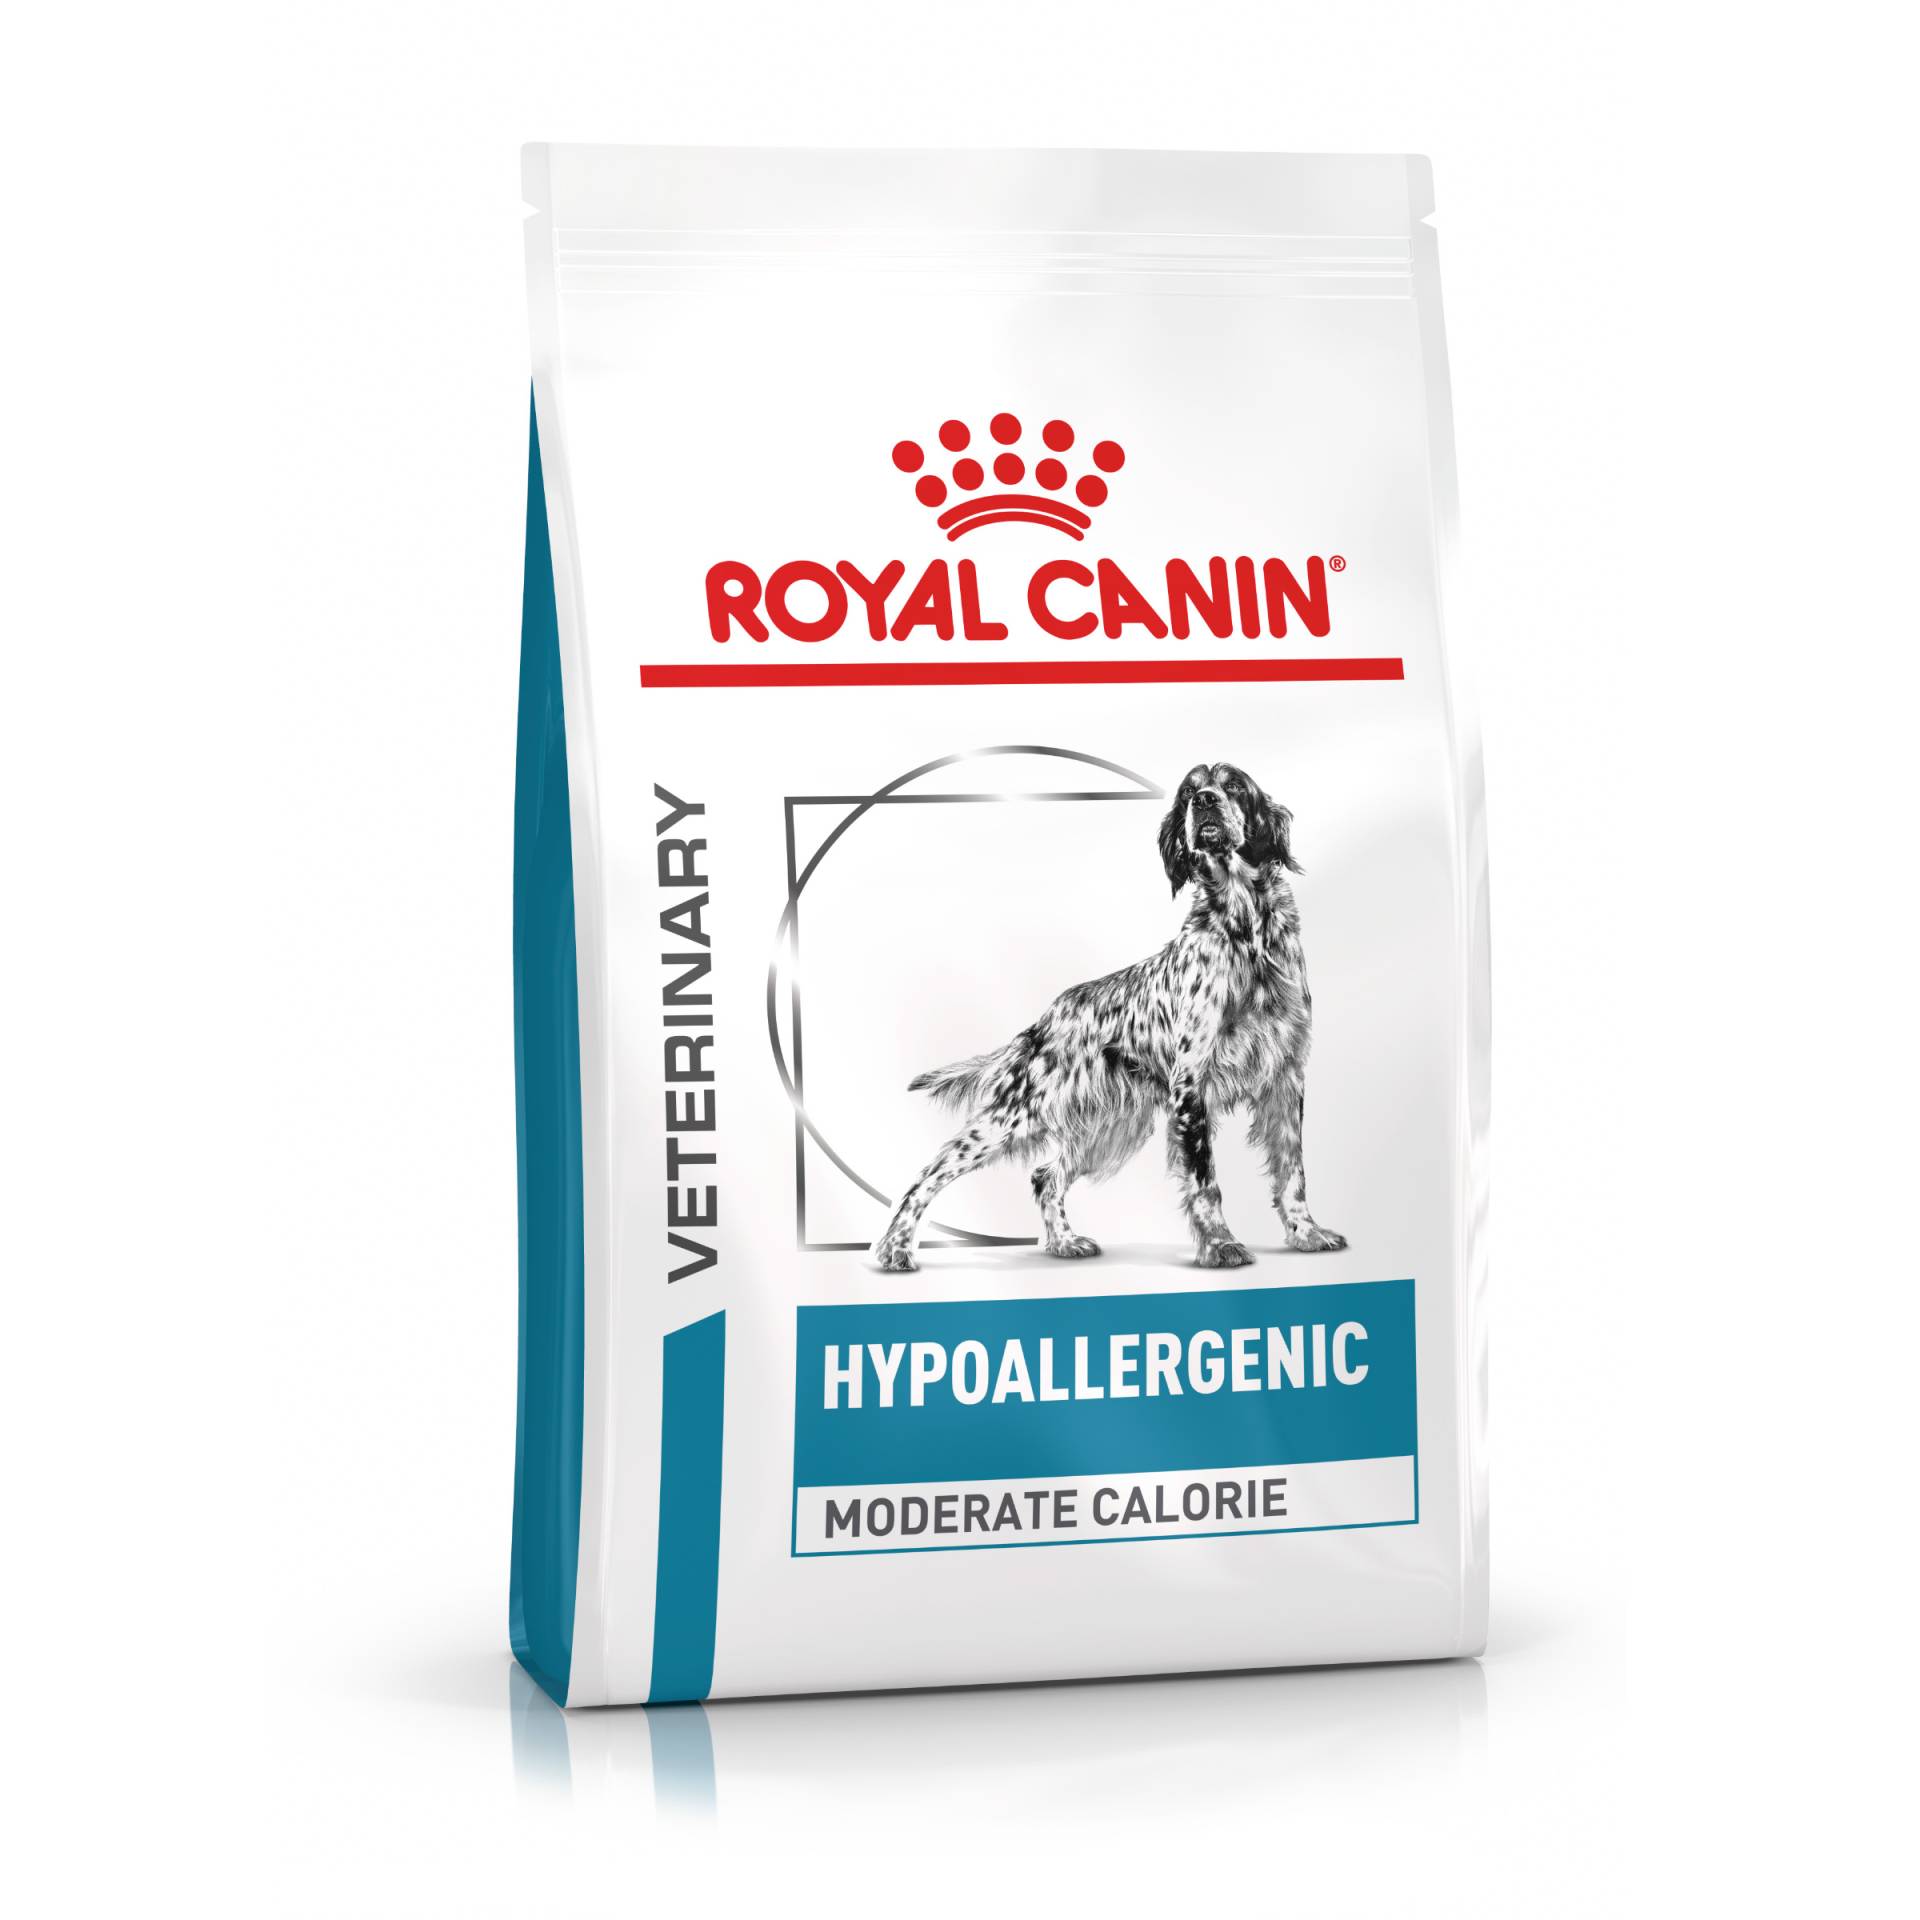 Royal Canin Veterinary Canine Hypoallergenic Moderate Calorie - 7 kg von Royal Canin Veterinary Diet